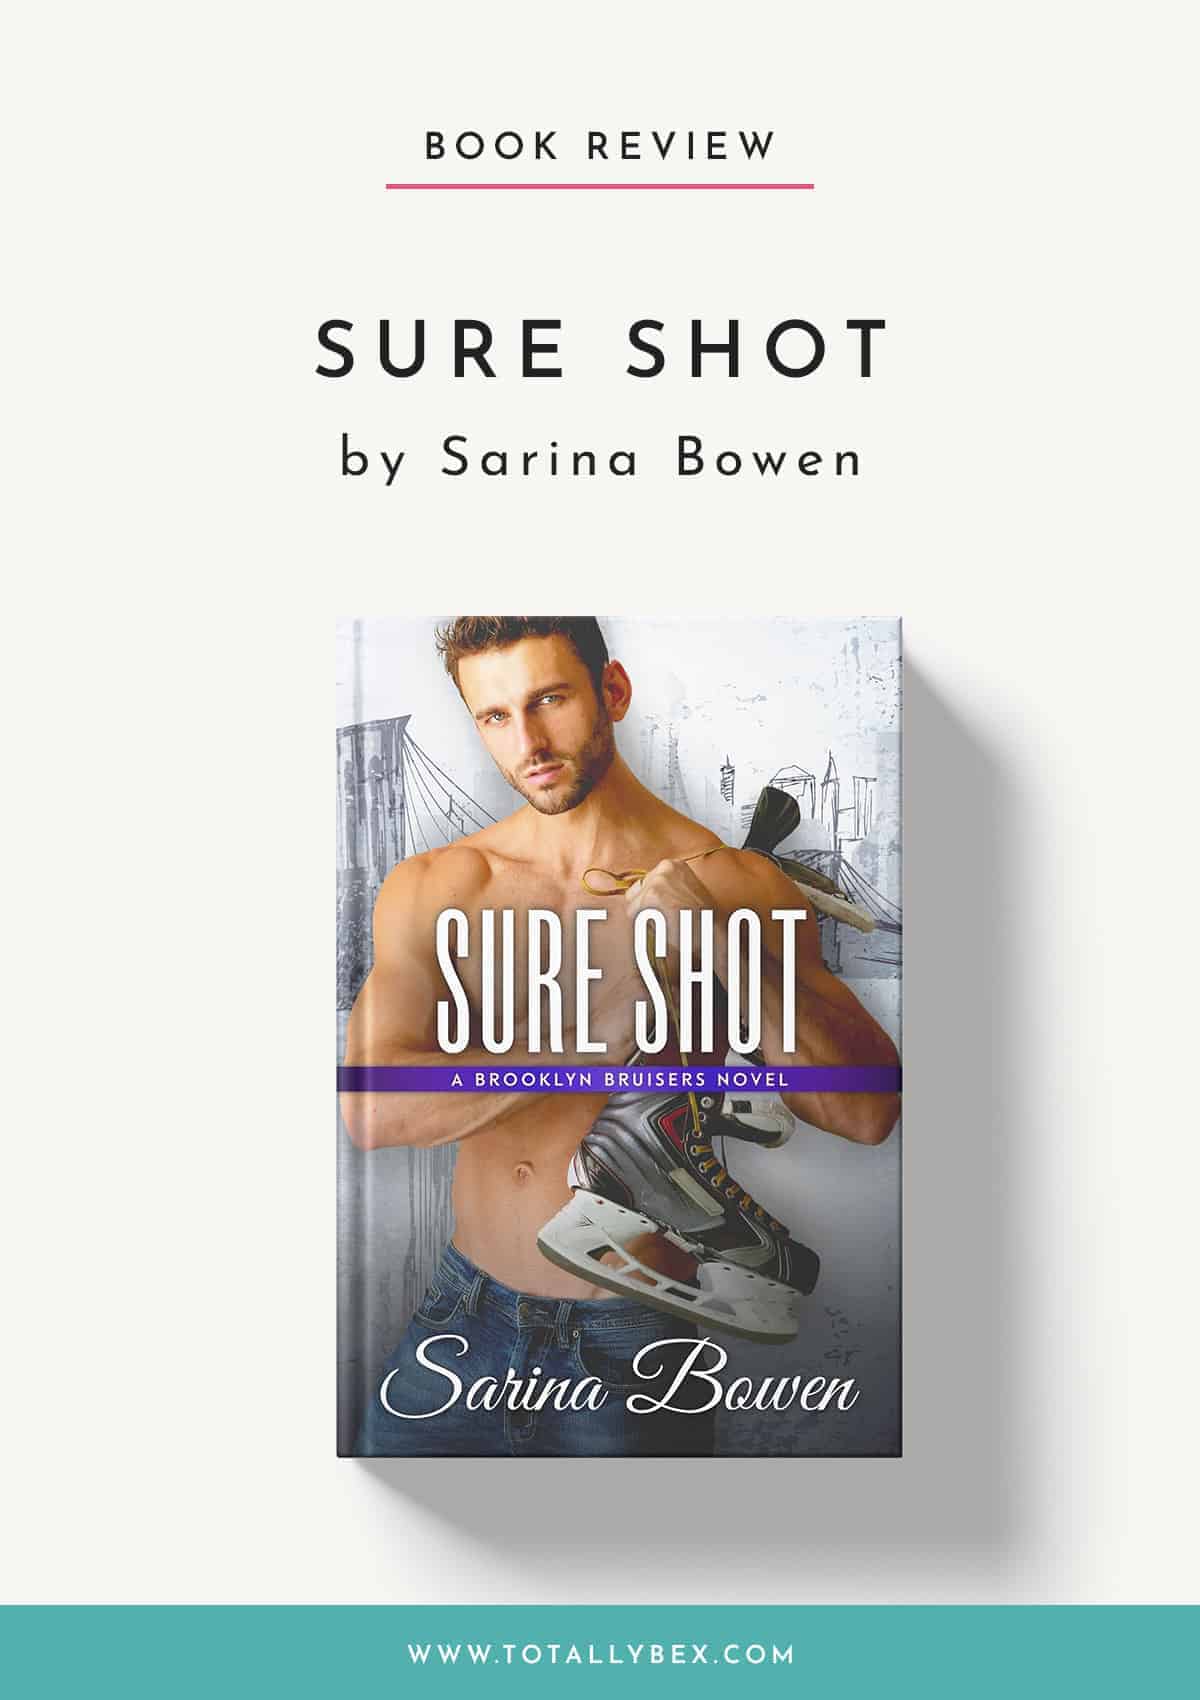 Sure Shot by Sarina Bowen, book 4 in the Brooklyn hockey romance series, is a sweet second-chance sports romance with lots of emotion, tons of heart, and heaps of heat.